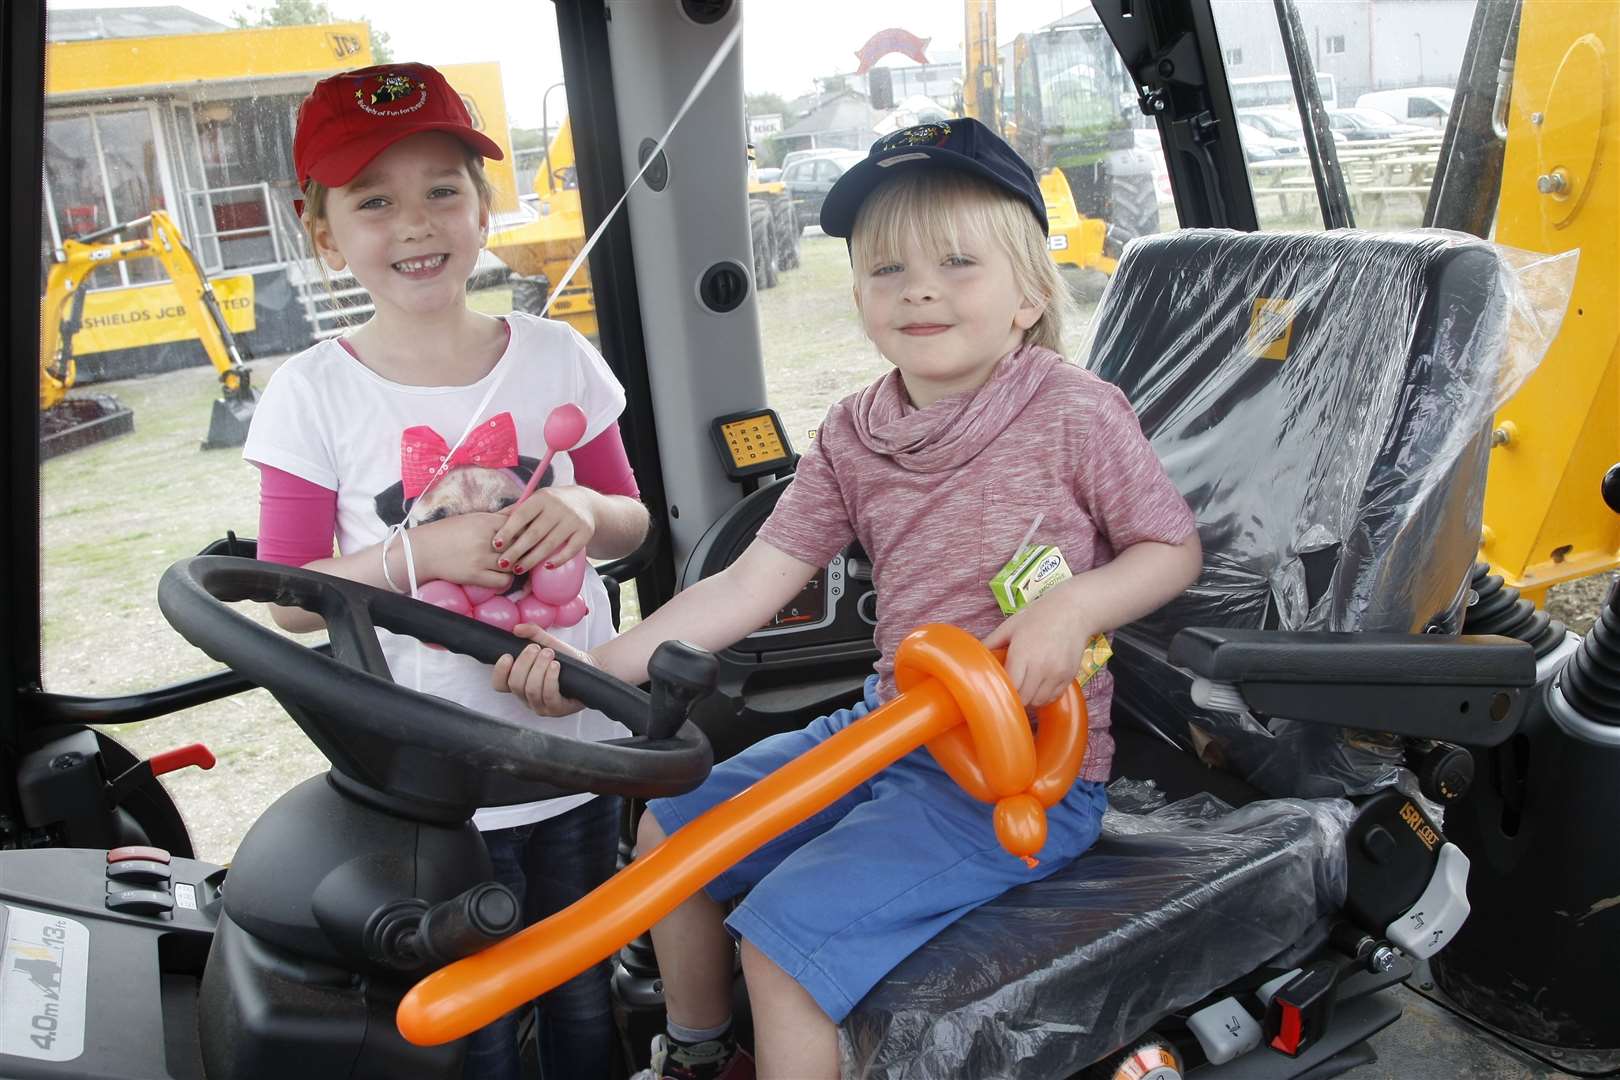 Lily Foyle and Zachary Foyle enjoying the attractions at Diggerland in 2012. Picture: Peter Still